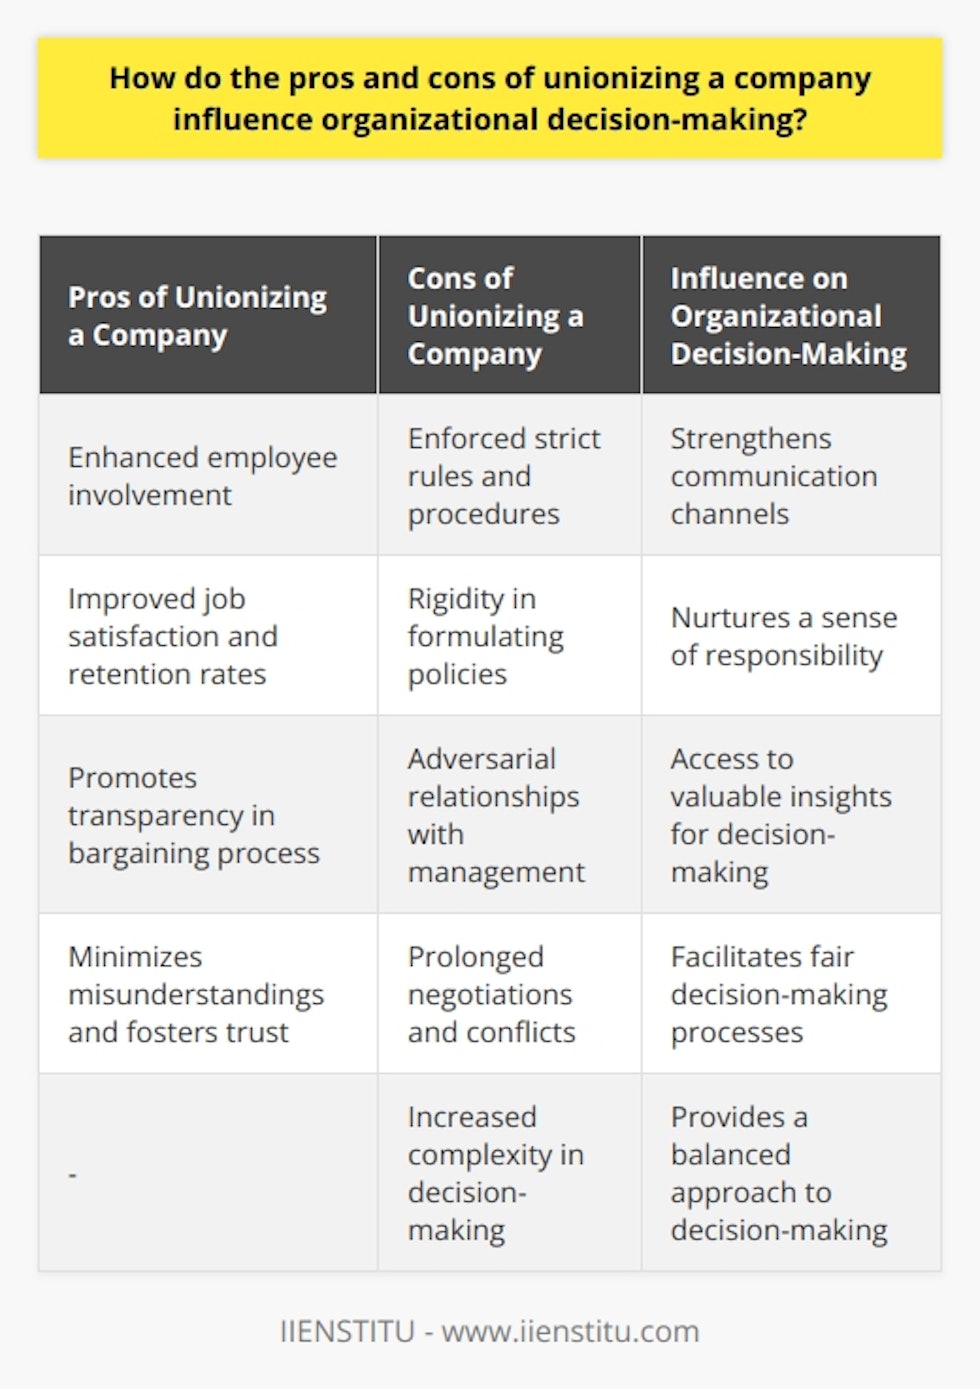 How do the pros and cons of unionizing a company influence organizational decision-making?Unionization significantly affects organizational decision-making in several ways. Firstly, by enhancing employee involvement during decision-making, it strengthens communication channels and nurtures a sense of responsibility among workers. When the workforce is actively engaged, management can access valuable insights resulting in better-informed decisions. This collaboration between management and employees can lead to more effective decision-making processes.Additionally, unionization ensures employee rights, which improves overall job satisfaction and retention rates. Happier employees tend to perform better, leading to desirable outcomes and effective decision-making. Unions also facilitate a fair bargaining process, promoting transparency in deciding wages, benefits, and working conditions. This clarity of expectations minimizes misunderstandings and fosters trust between workers and management.However, unionization also poses challenges to organizational decision-making processes. Unions may create rigidity by enforcing strict rules and procedures, limiting the flexibility of management in formulating policies. These constraints can hinder efficiency and impede the company's ability to adjust to market demands. It is important for management to find a balance between satisfying union demands and maintaining the organization's ability to respond quickly to changing circumstances.Moreover, adversarial relationships might emerge between management and the union, causing prolonged negotiations, conflicts, and delayed decisions. Companies may become less competitive due to the increased complexity in decision-making. Excessive demands by unions may lead to higher costs, reducing the organization's ability to invest in growth and innovation.In order to make optimal decisions, organizations need to find a balance between the advantages and challenges of unionization. Management should adopt a collaborative approach, recognizing the value of an empowered workforce while ensuring that union demands do not obstruct progress. Communication, willingness to compromise, and a proactive attitude can help companies to strike the right balance between employee rights, organizational mobility, and sustainable growth.In conclusion, the pros and cons of unionizing a company influence organizational decision-making by affecting communication, employee involvement, and management flexibility. Striving for a healthy balance between these factors is essential for the organization's overall success. By understanding and addressing the potential challenges of unionization, companies can make informed decisions that benefit both employees and the organization as a whole.